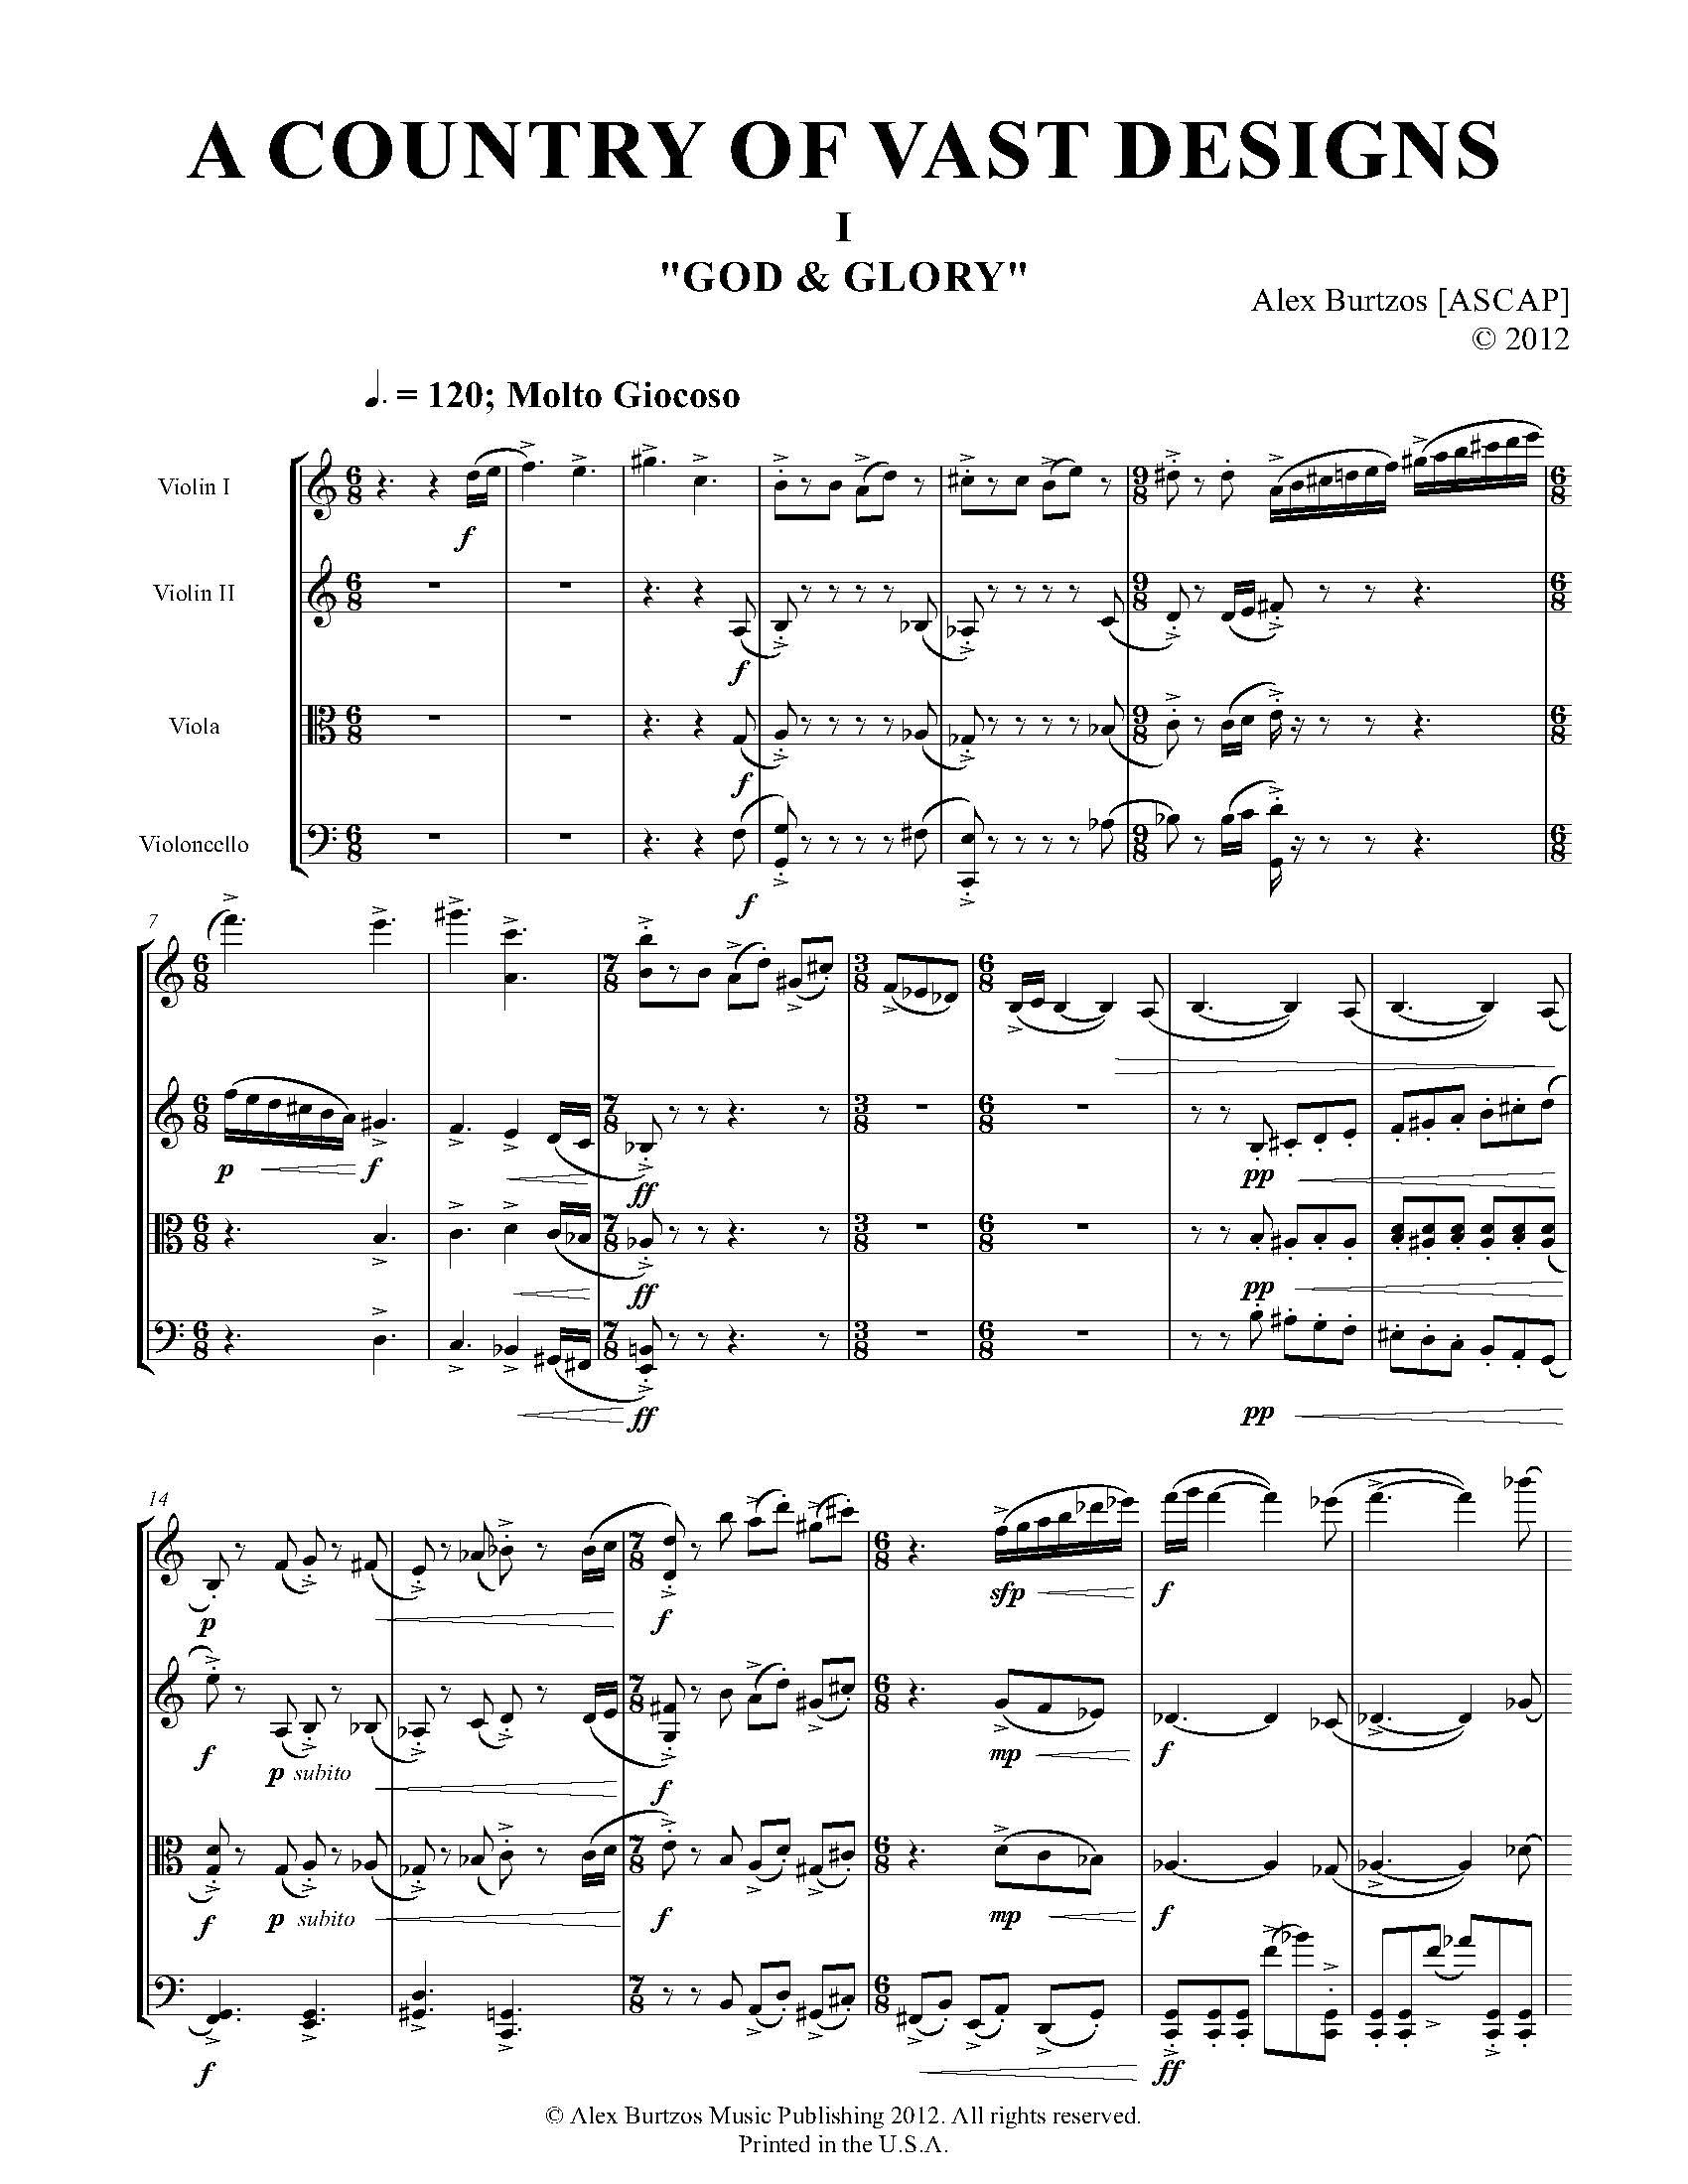 A Country of Vast Designs - Complete Score_Page_07.jpg